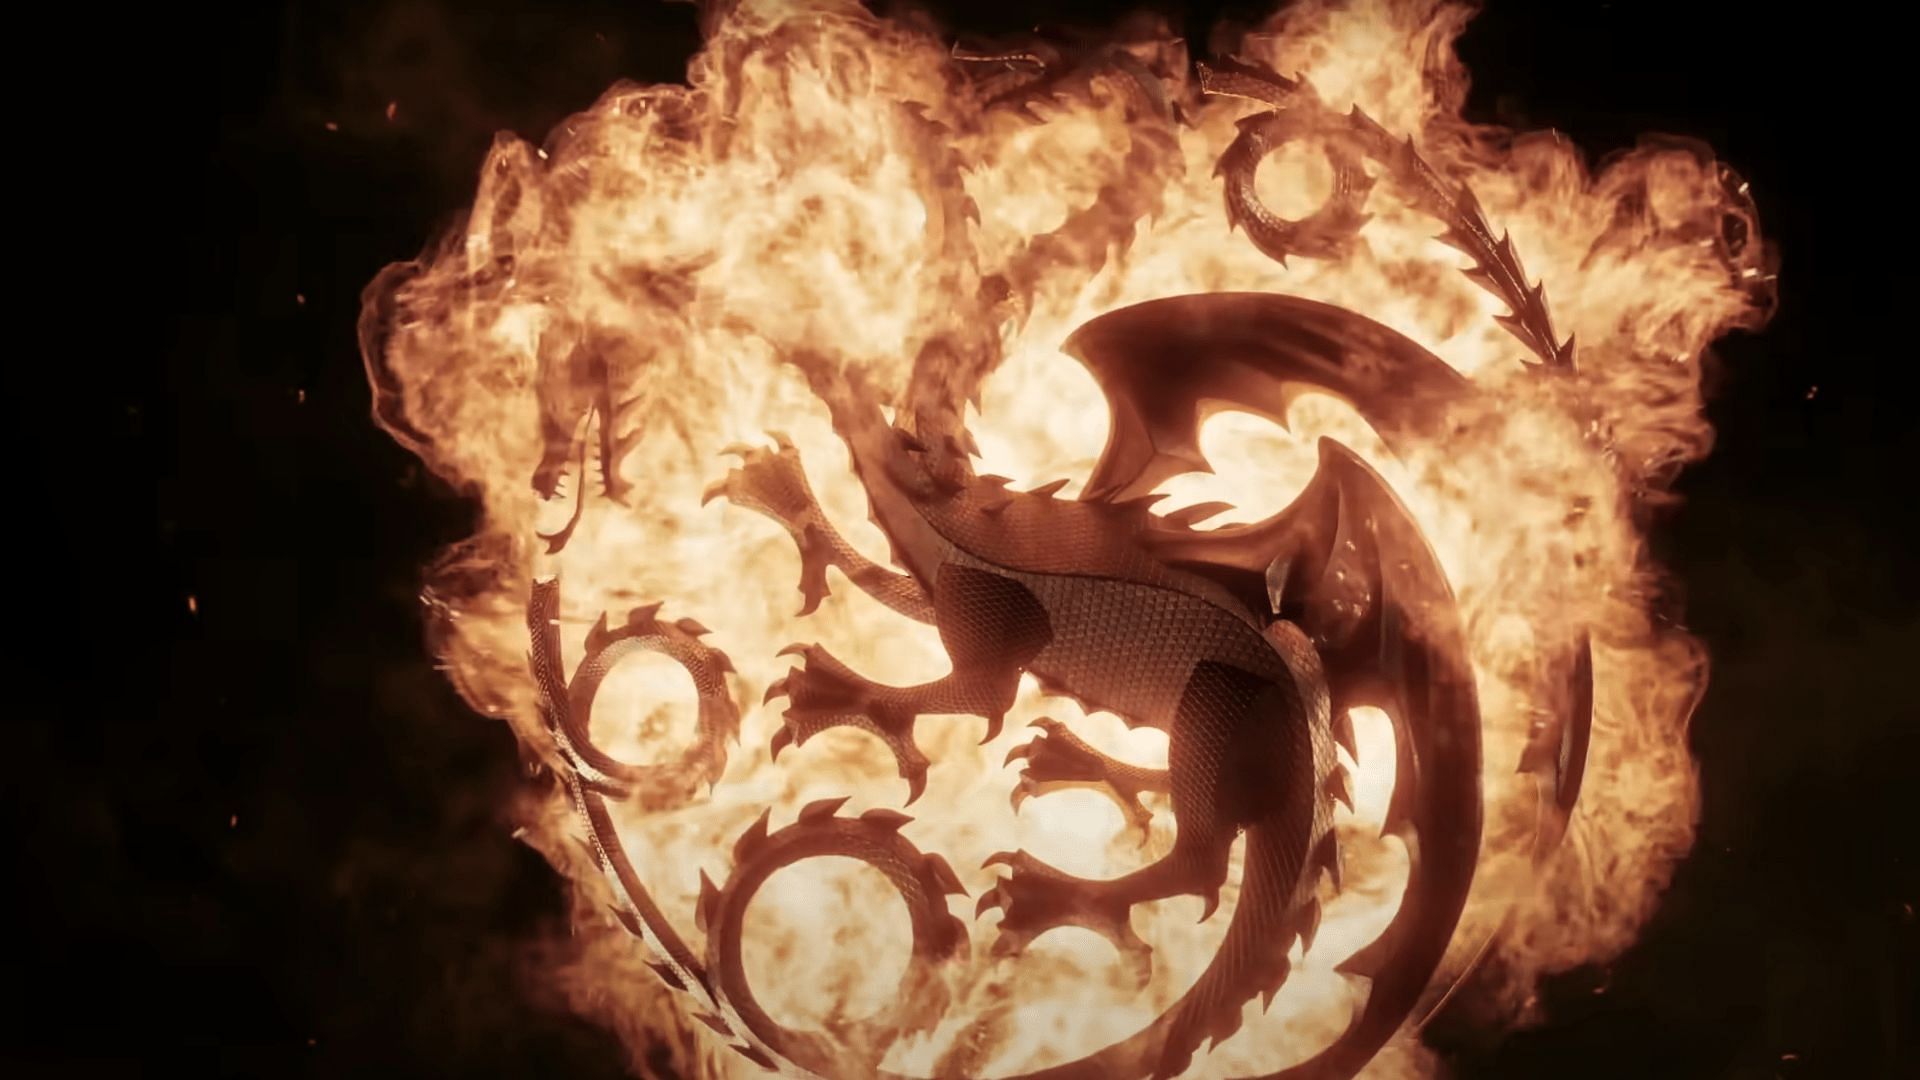 The Fire and Blood logo in House of the Dragon (Image by Max)